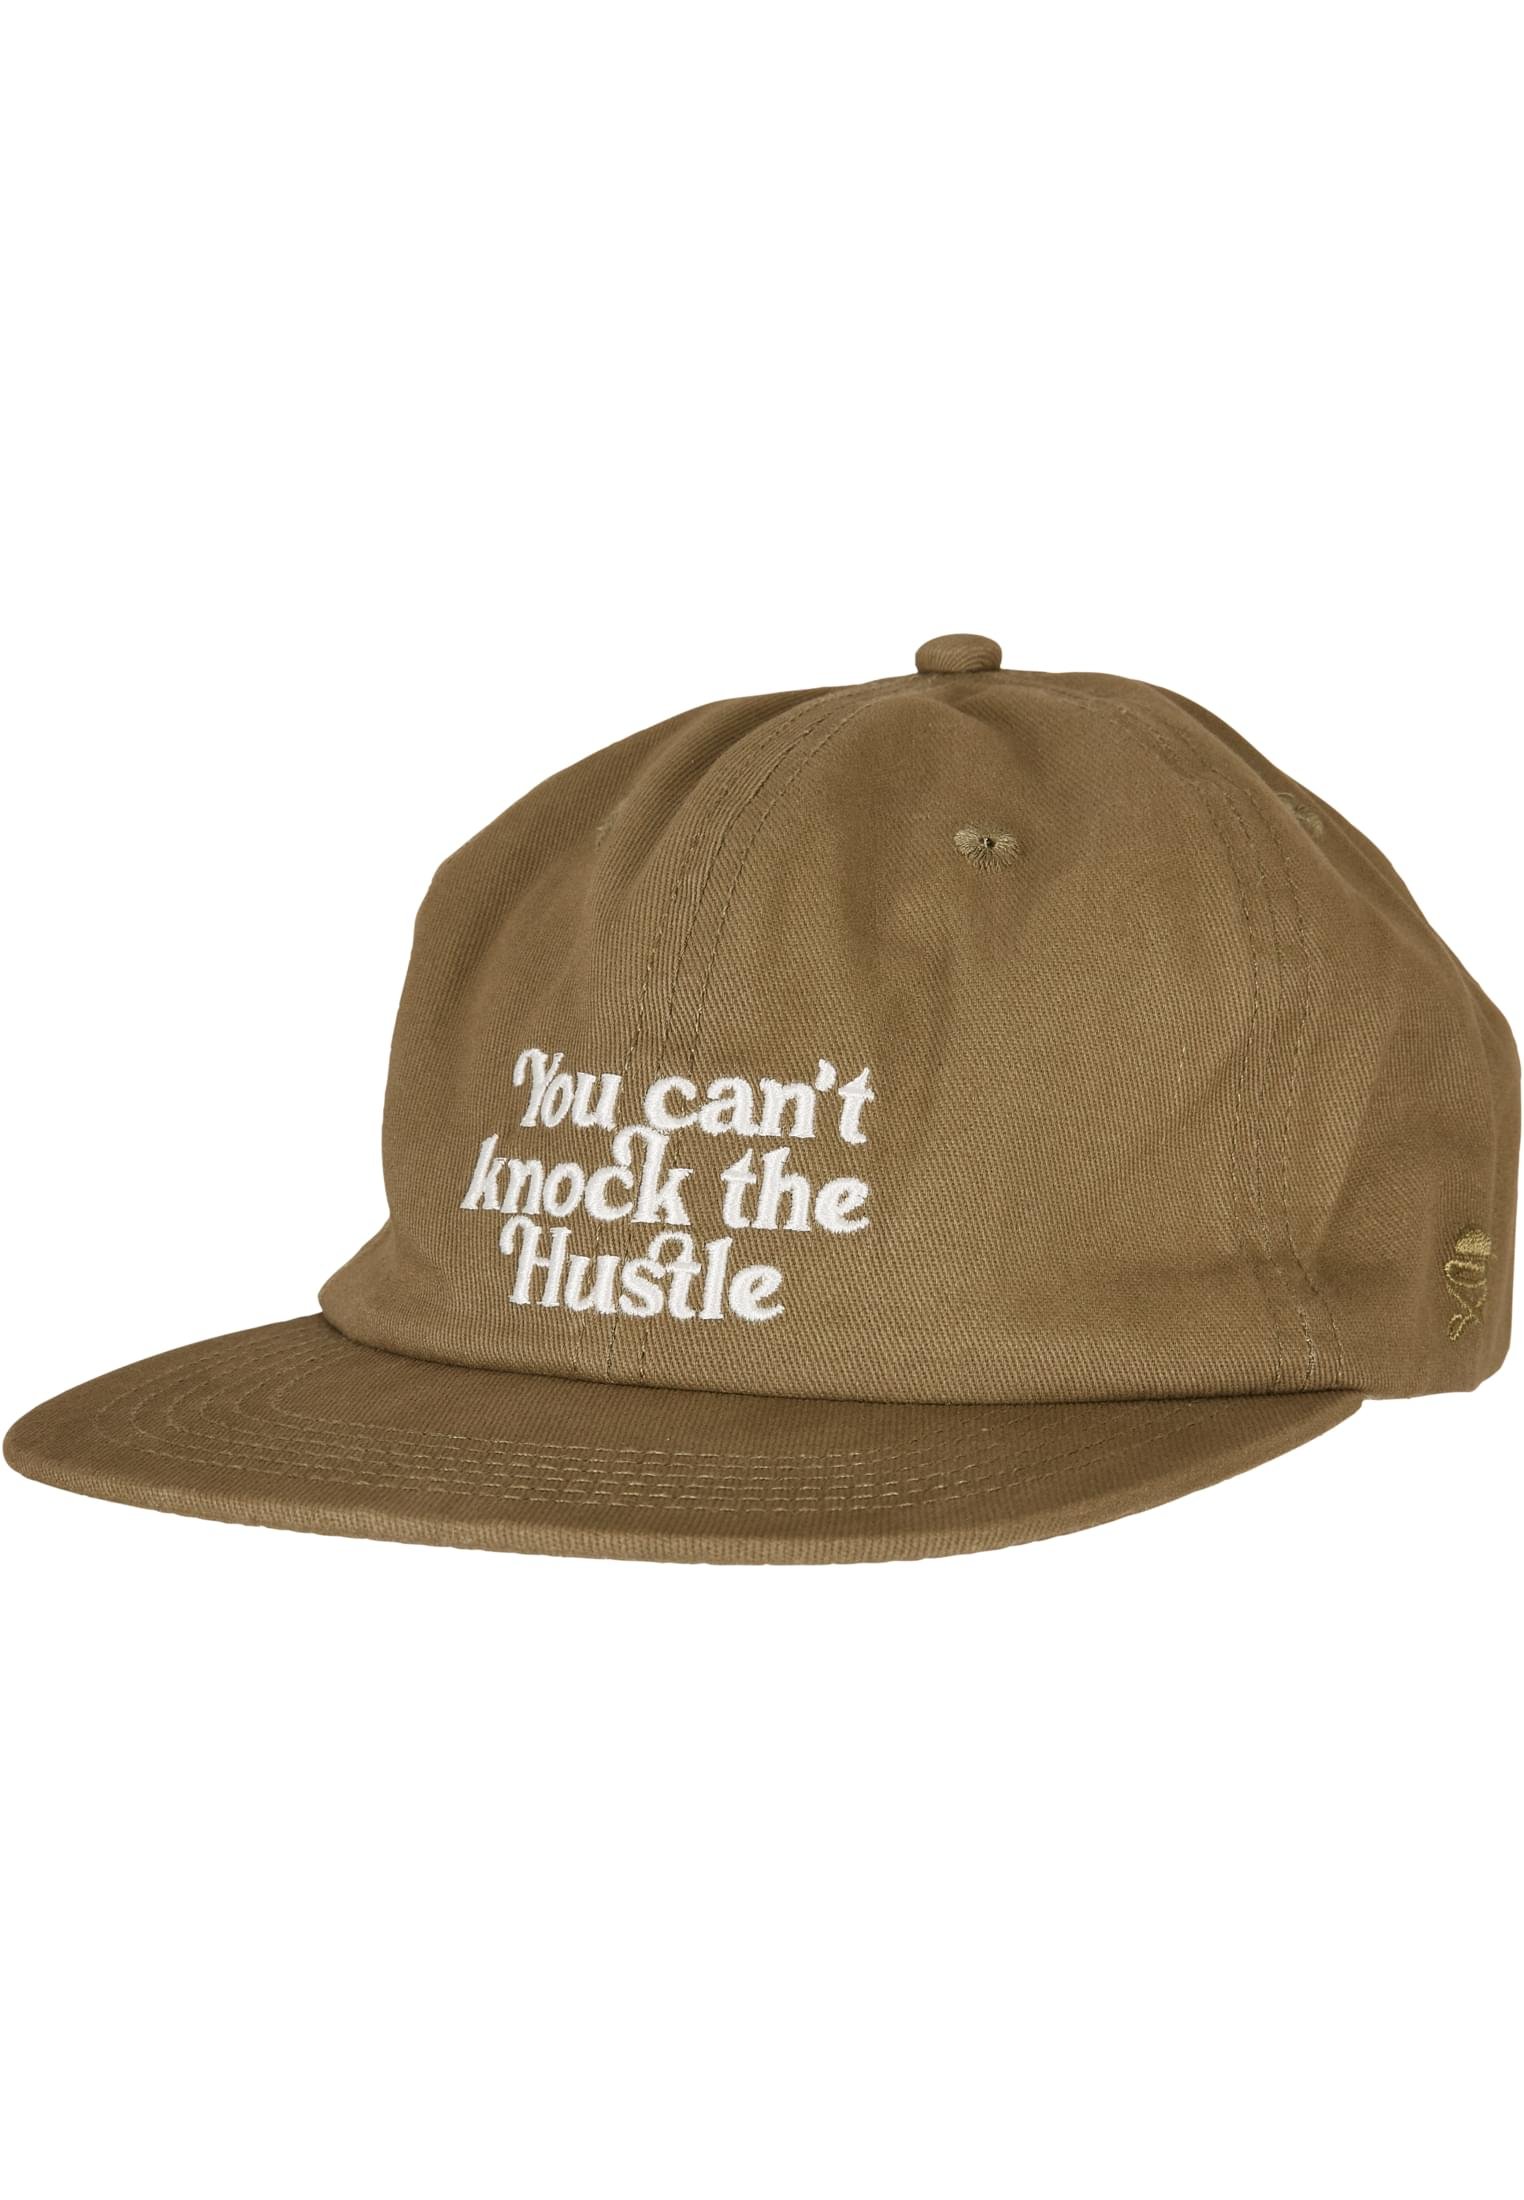 Knock the Hustle Strapback Cap olive/offwhite one size